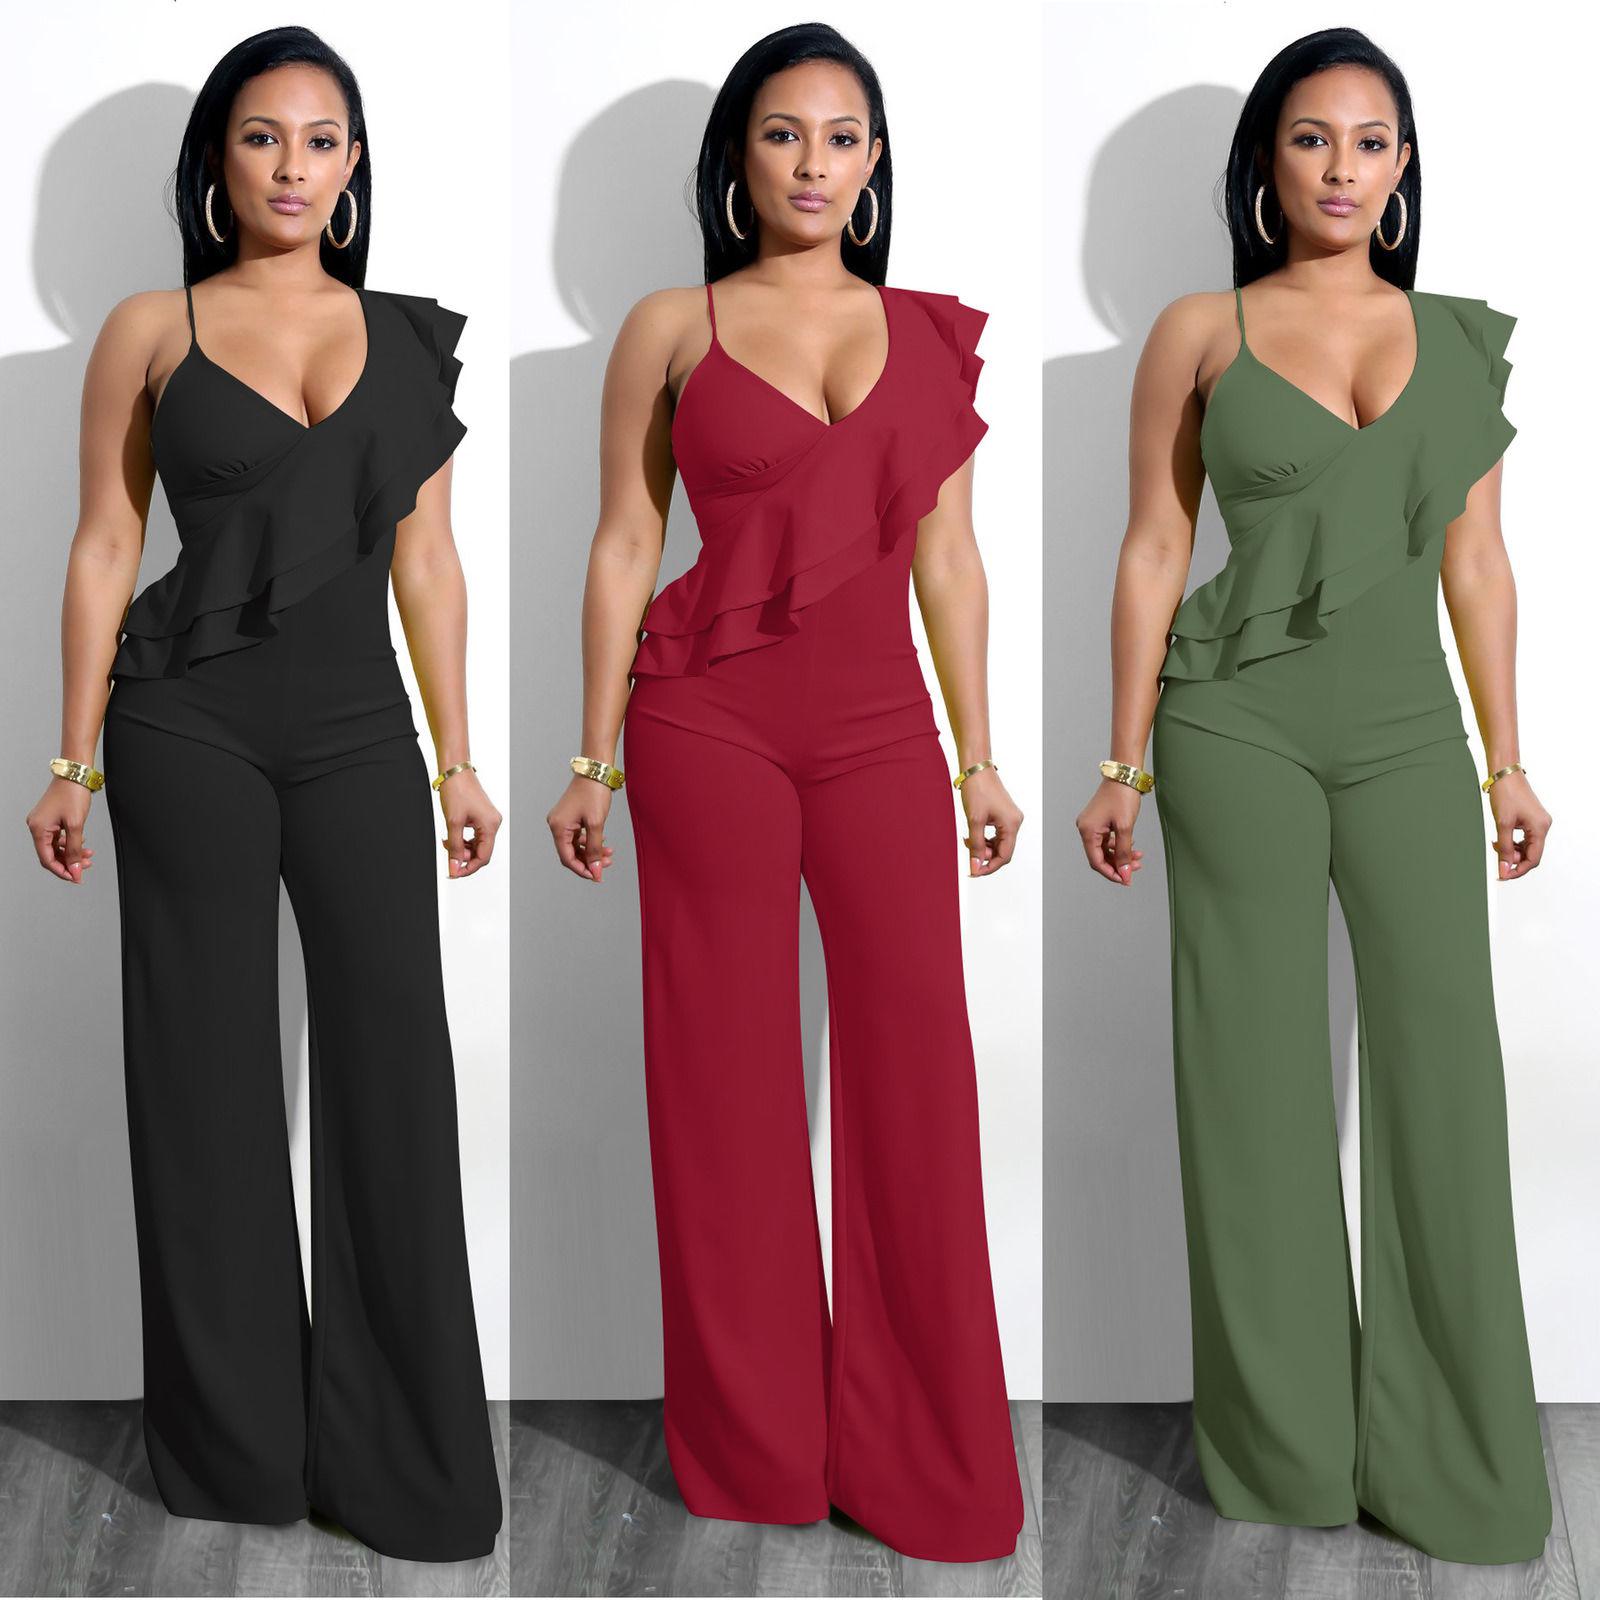 Sexy Women sleeveless ruffled v Neck bodycon casual club party jumpsuit ...